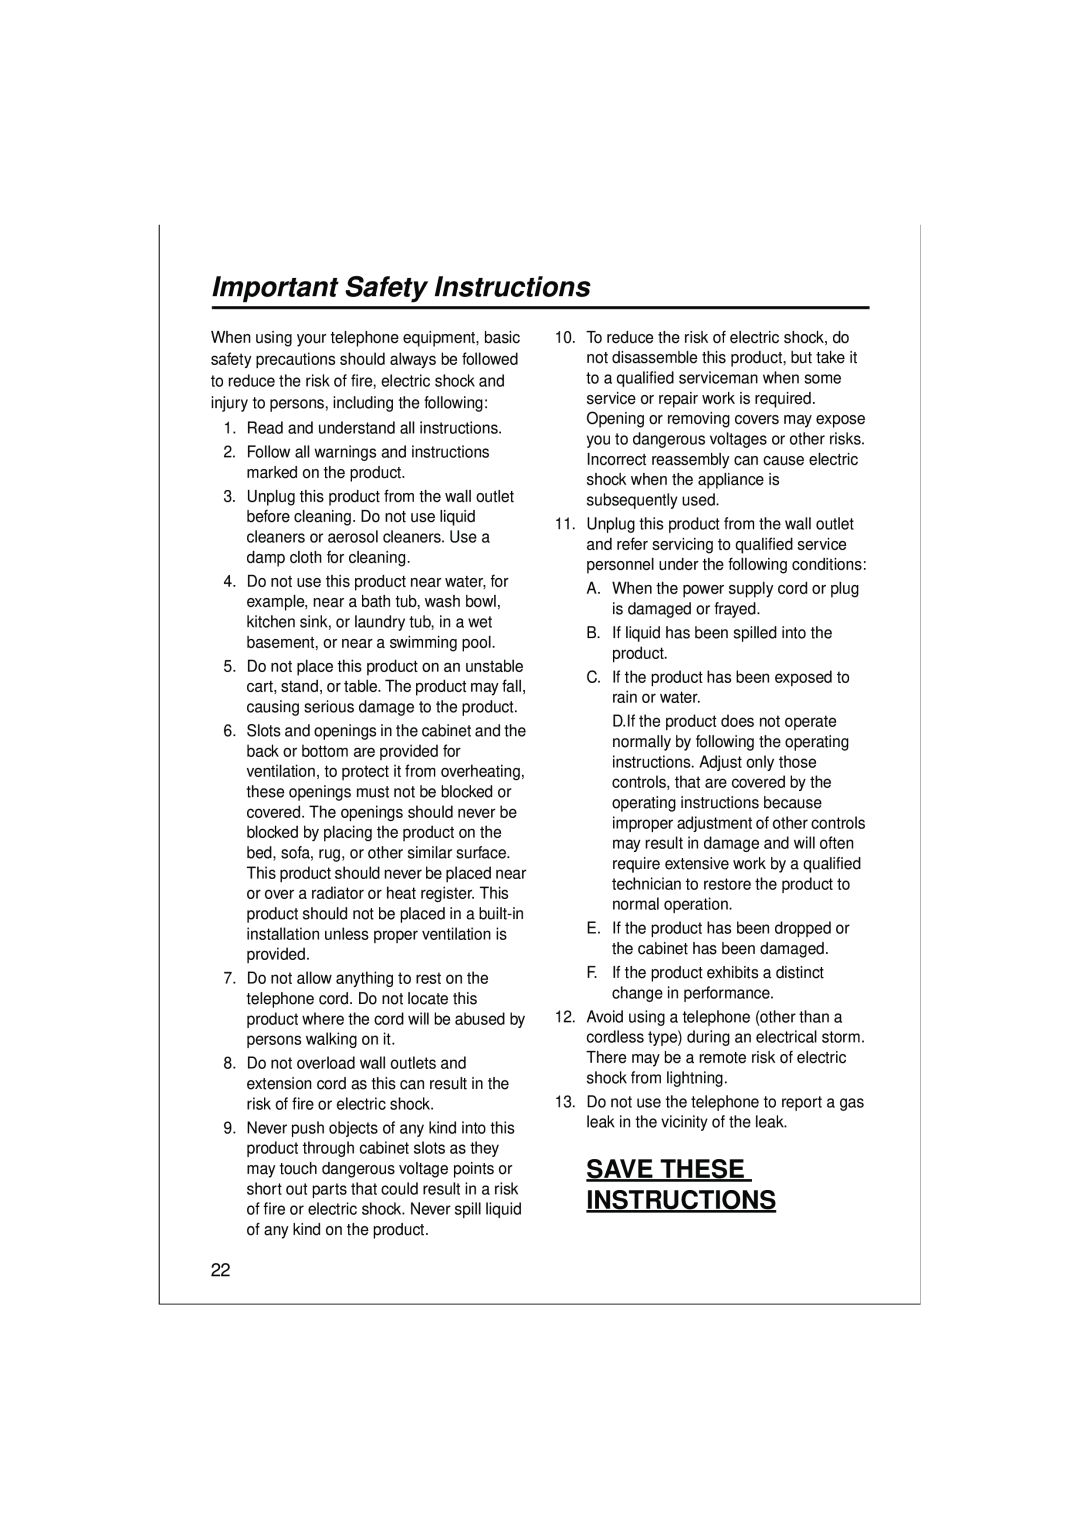 Panasonic KX-T7633, KX-T7636, KX-T7625, KX-T7630 operating instructions Important Safety Instructions, Save These Instructions 